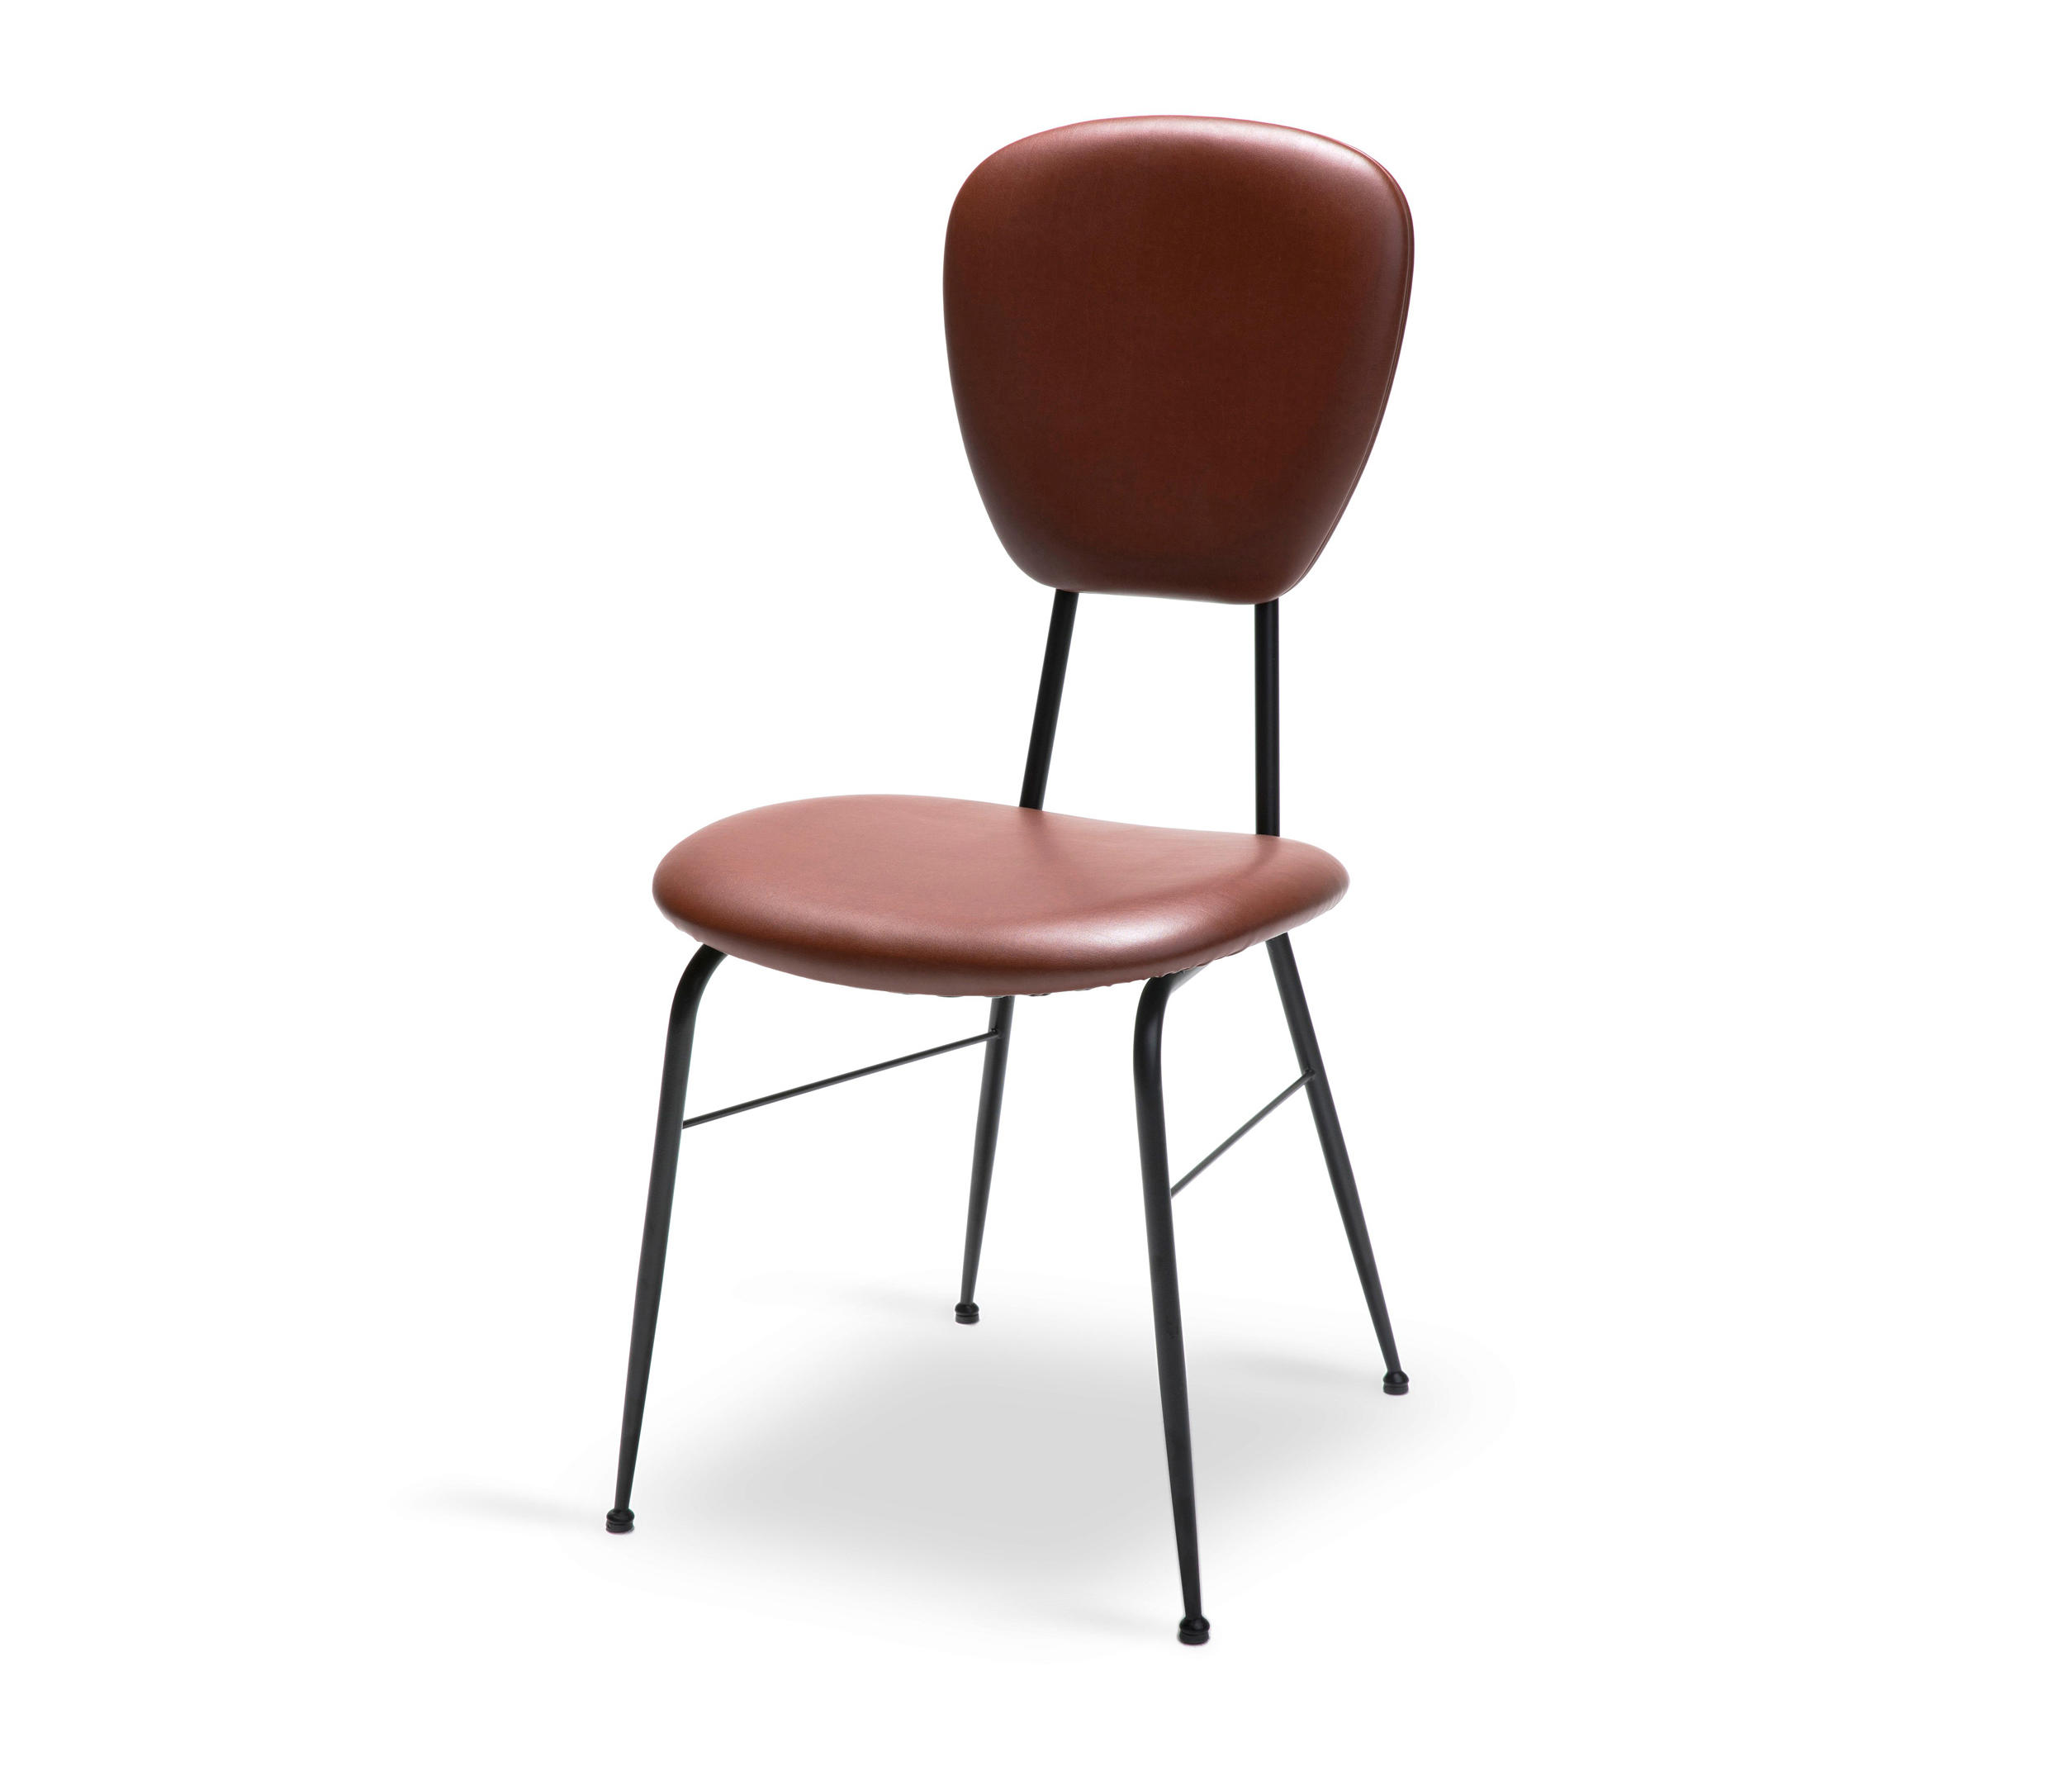 Lola Chic 2 Chairs From Lalabonbon Architonic 5960